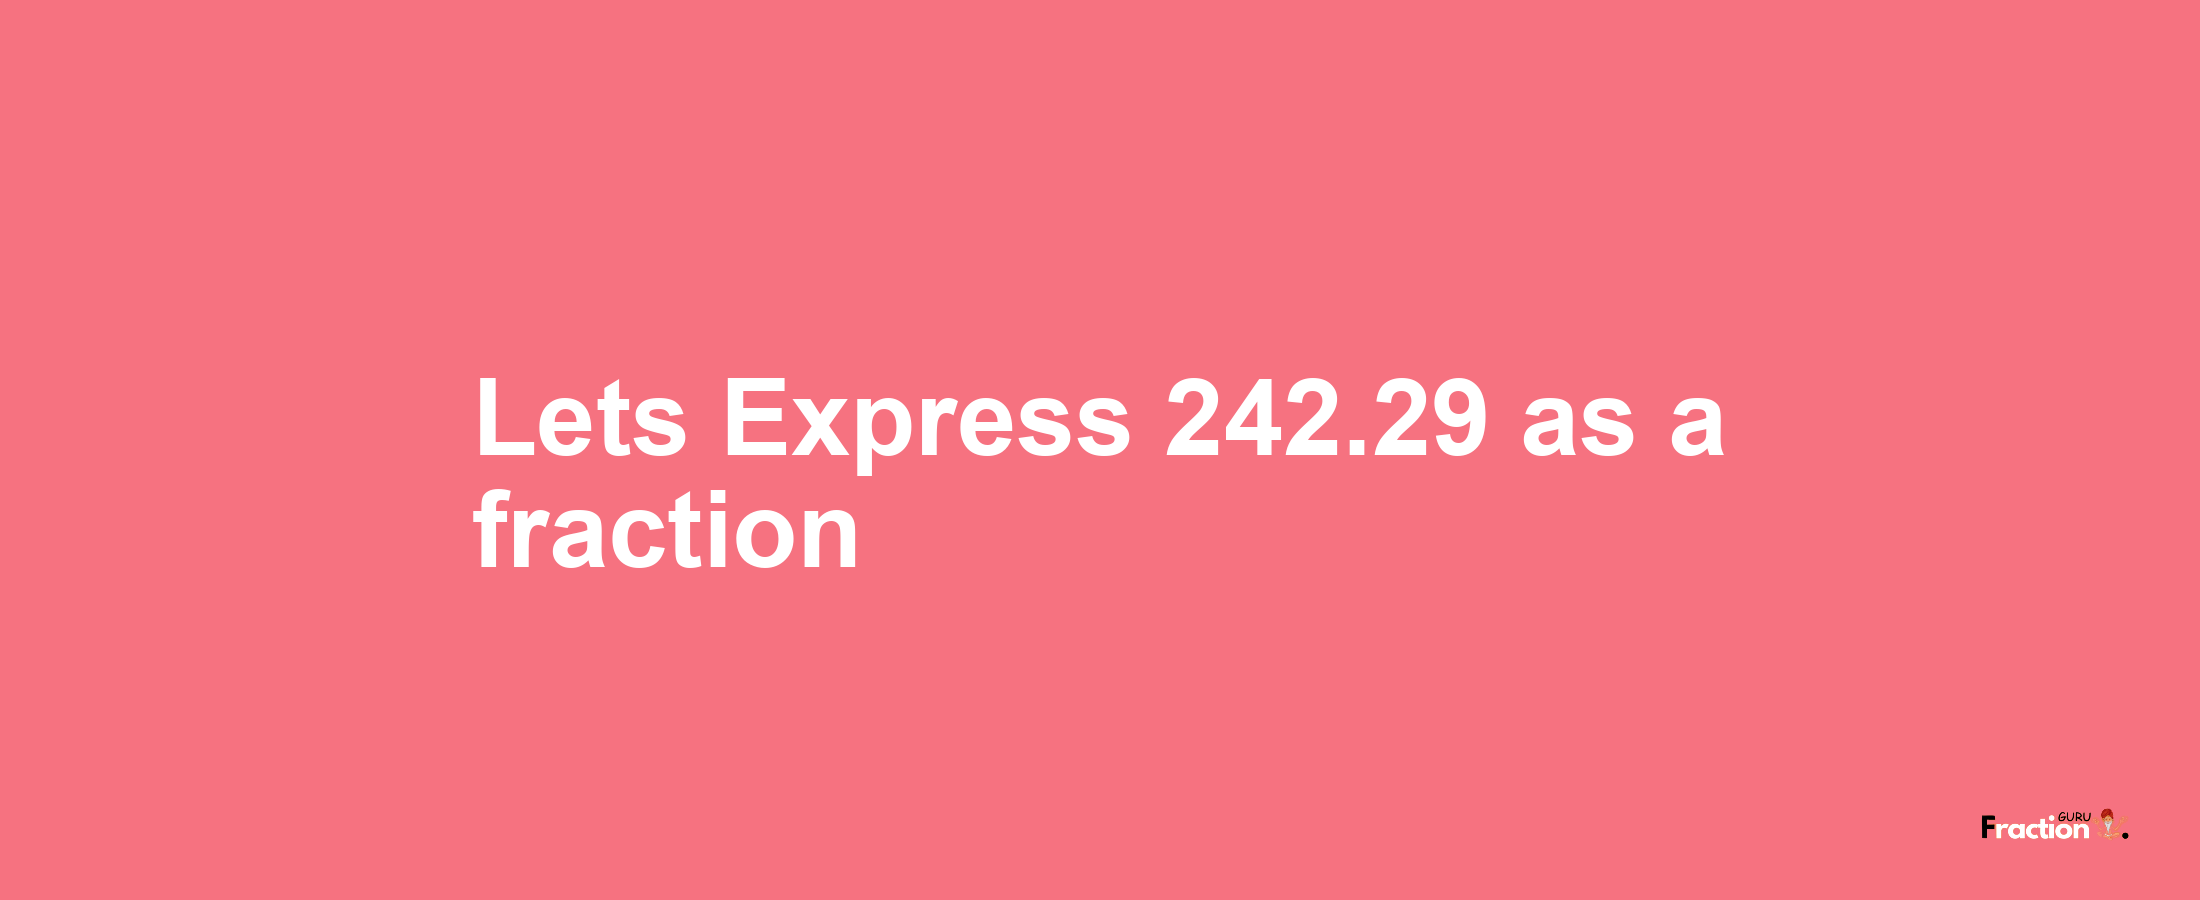 Lets Express 242.29 as afraction